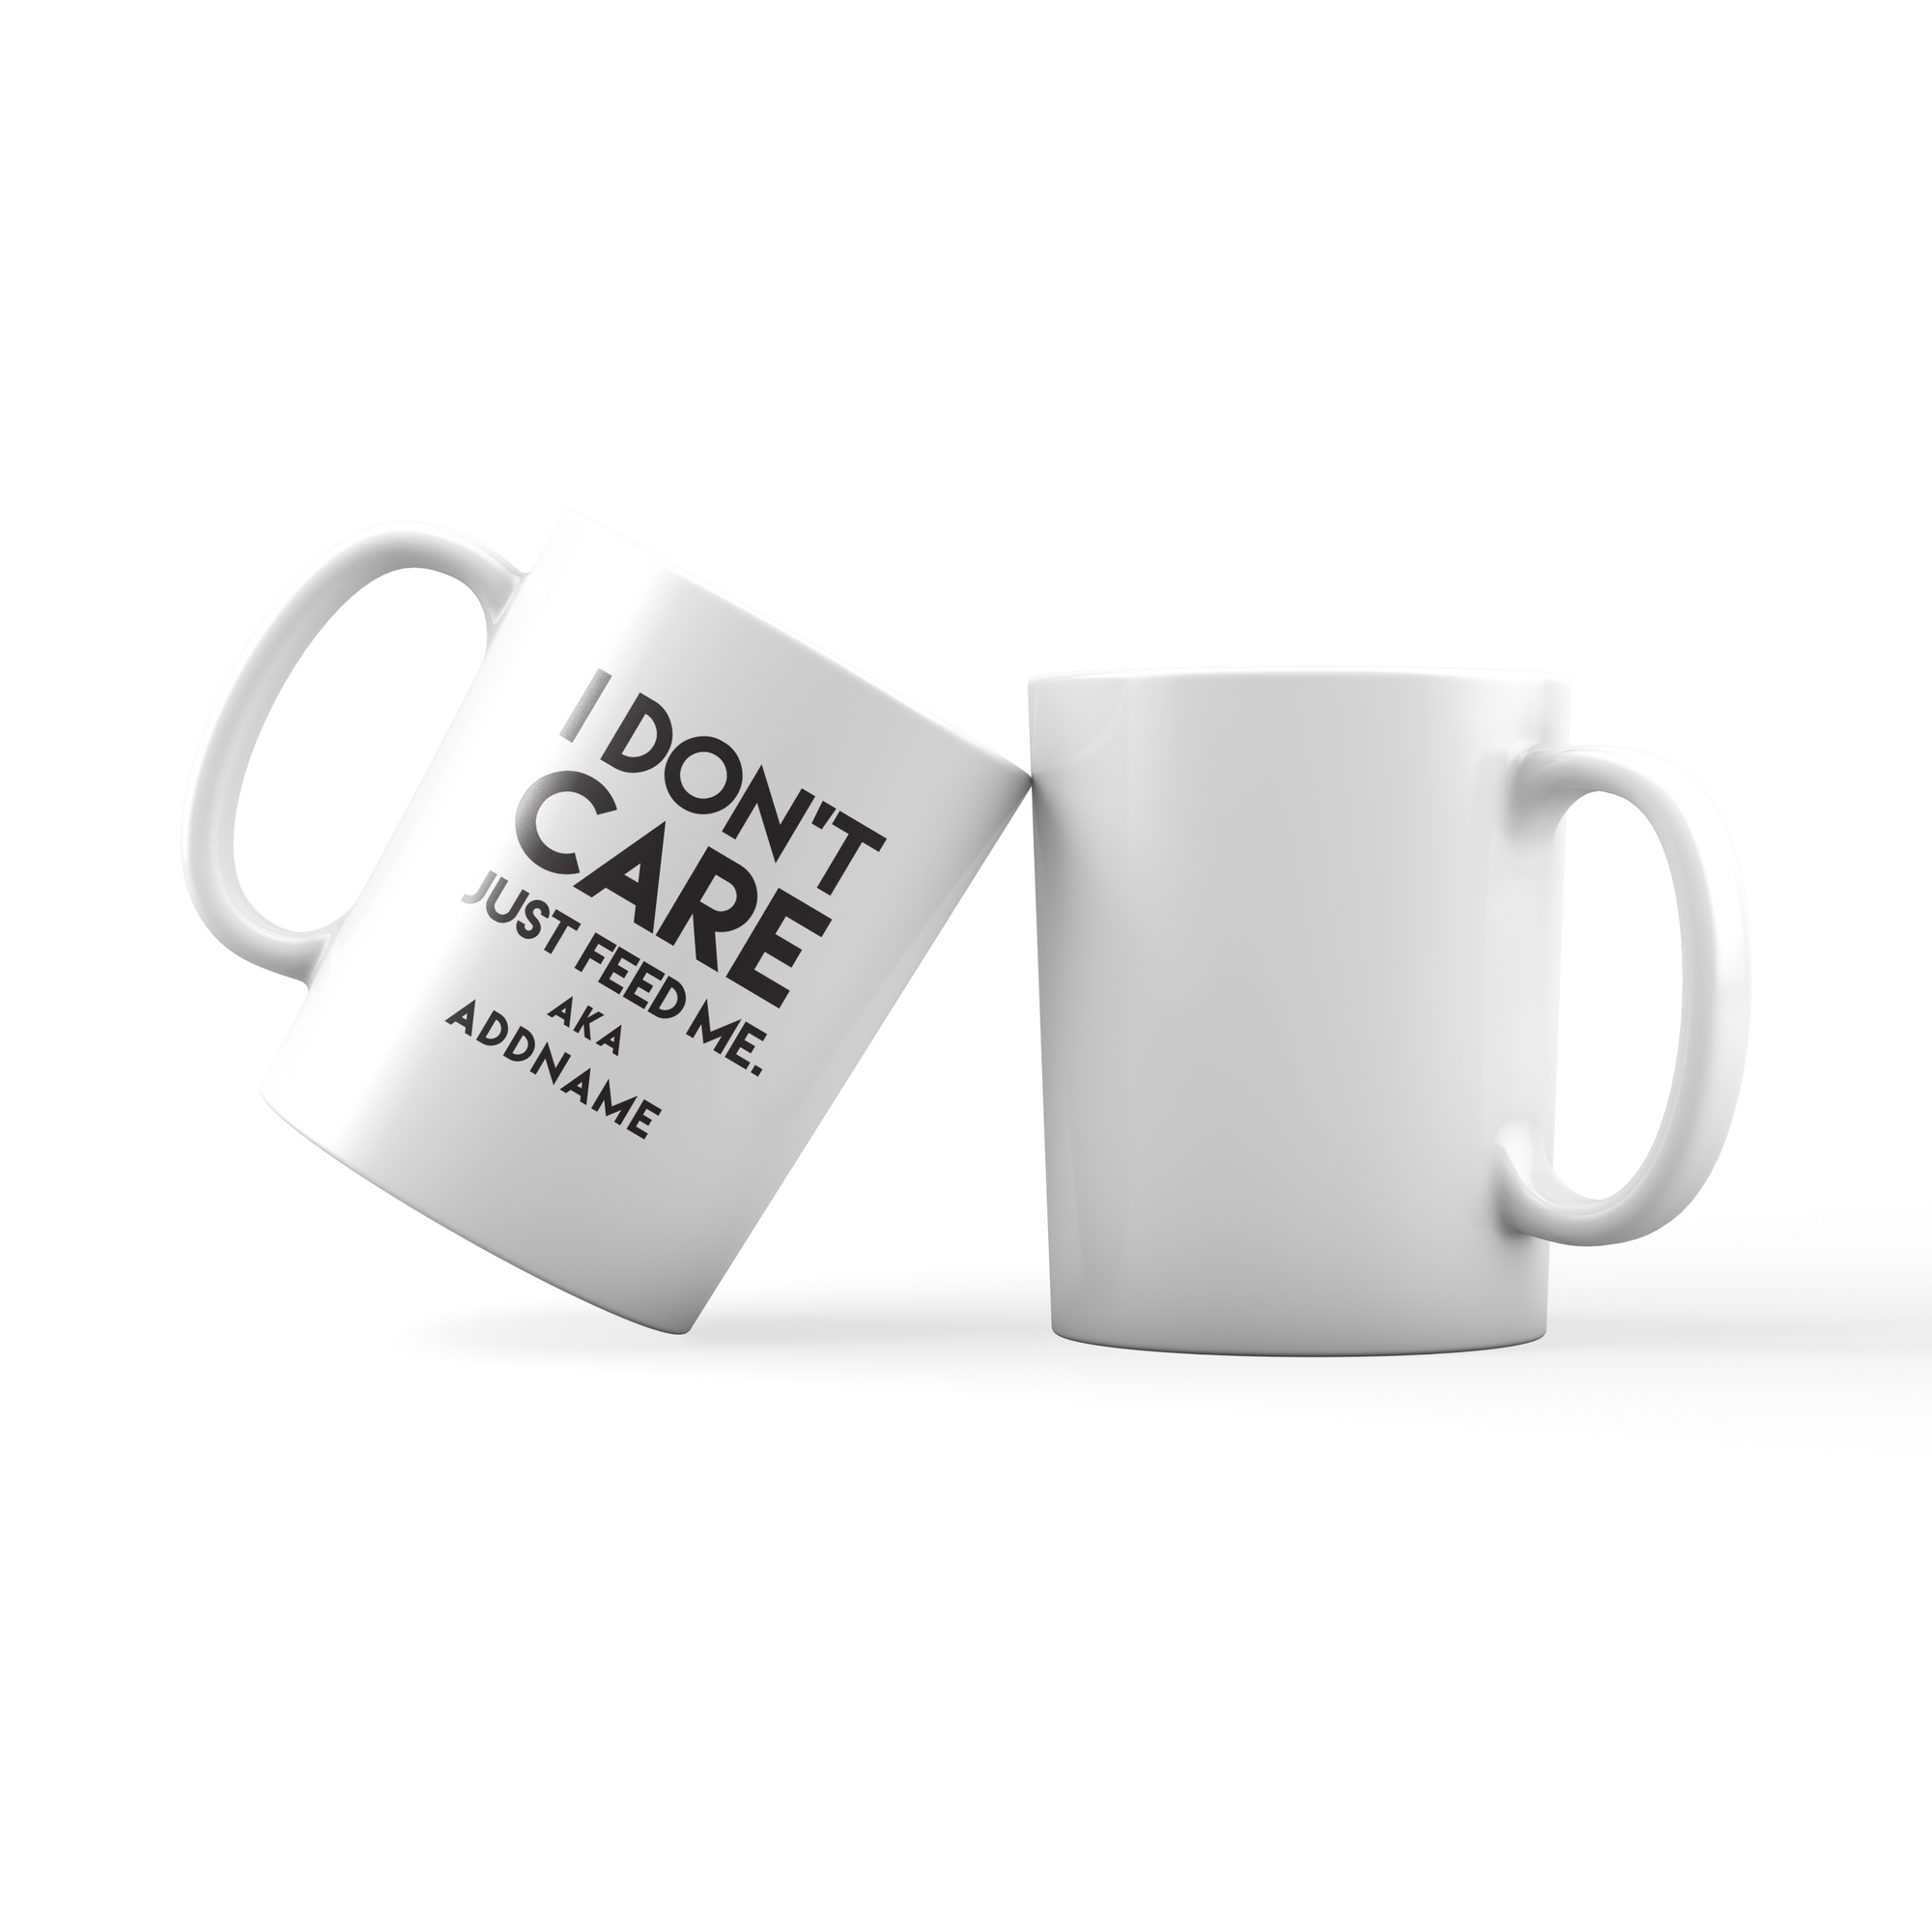 I Don't Care Who's Right Just Feed Me Addname Mug